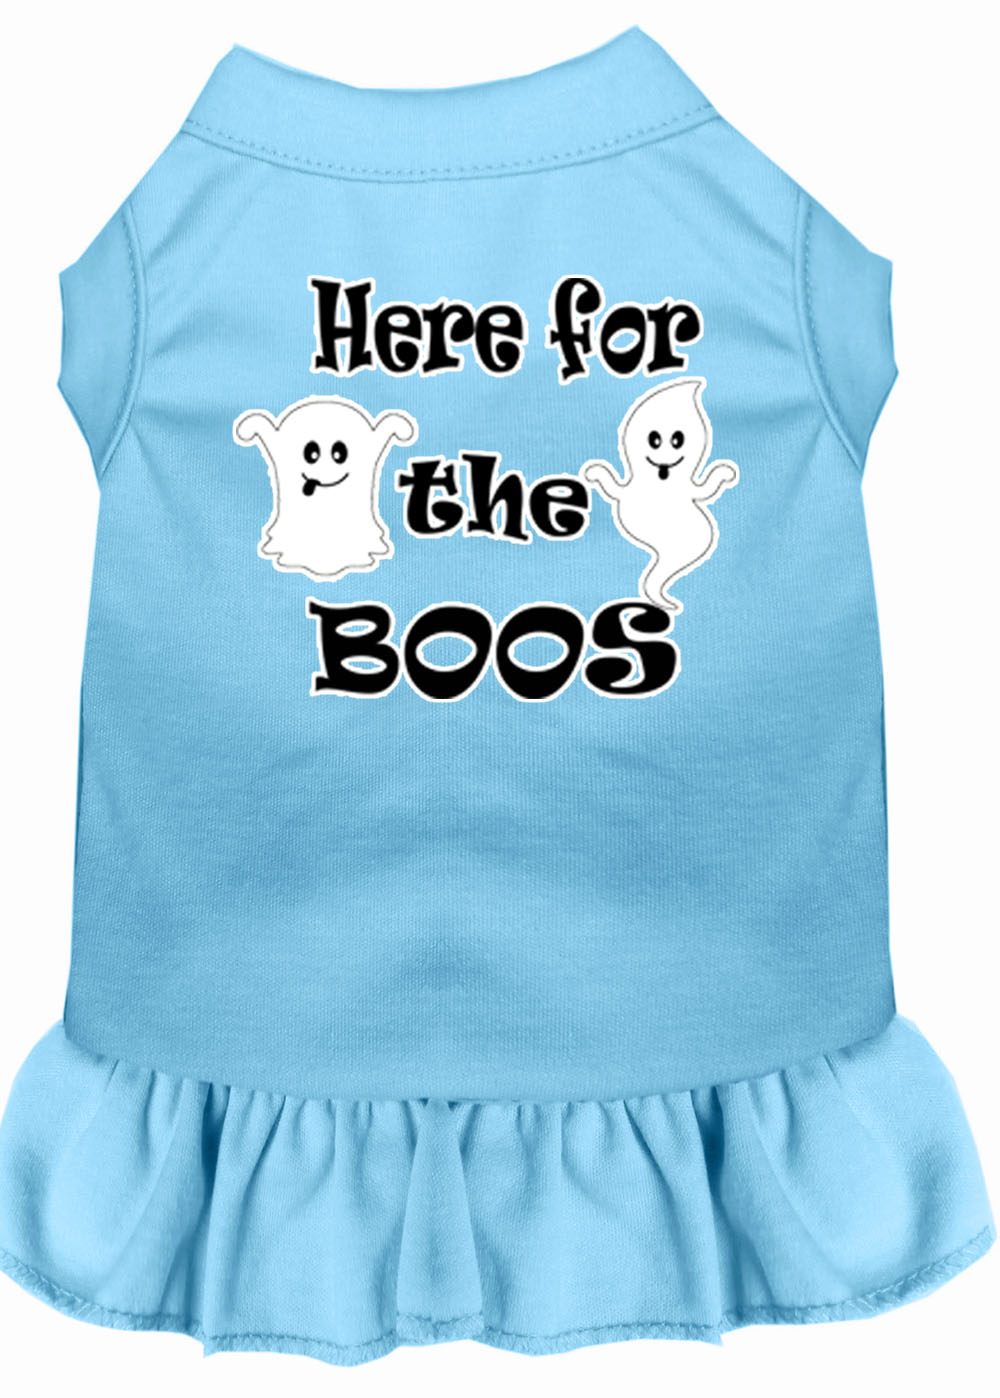 Here for the Boos Screen Print Dog Dress Baby Blue XL